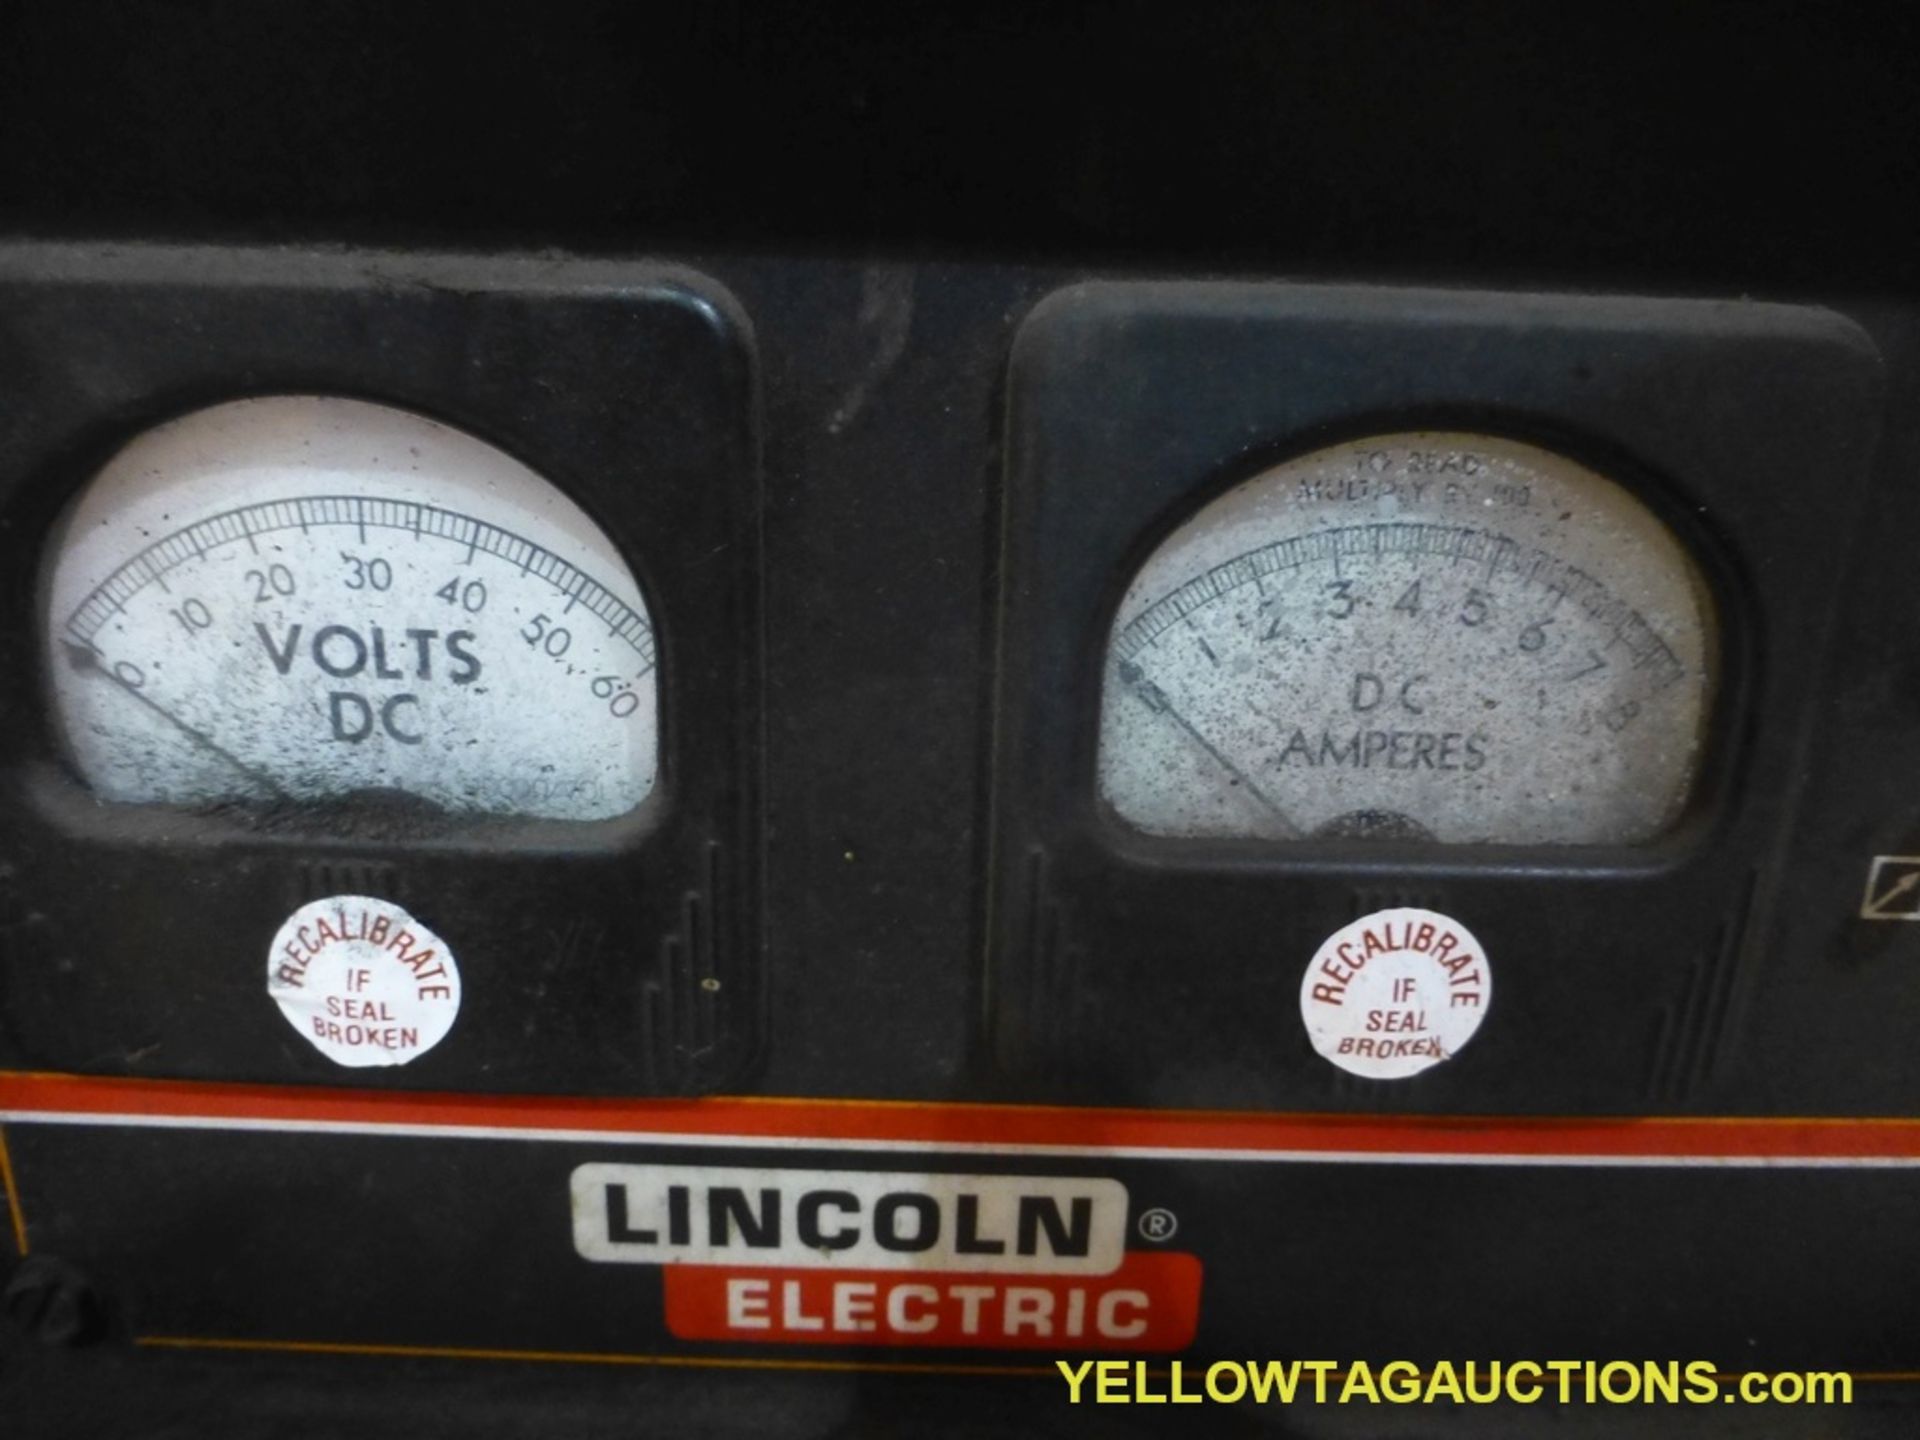 Lincoln Electric DC-600 Welder w/Multiprocess Switch | Includes: Lincoln Wire Feeder LN-9 - Image 3 of 8